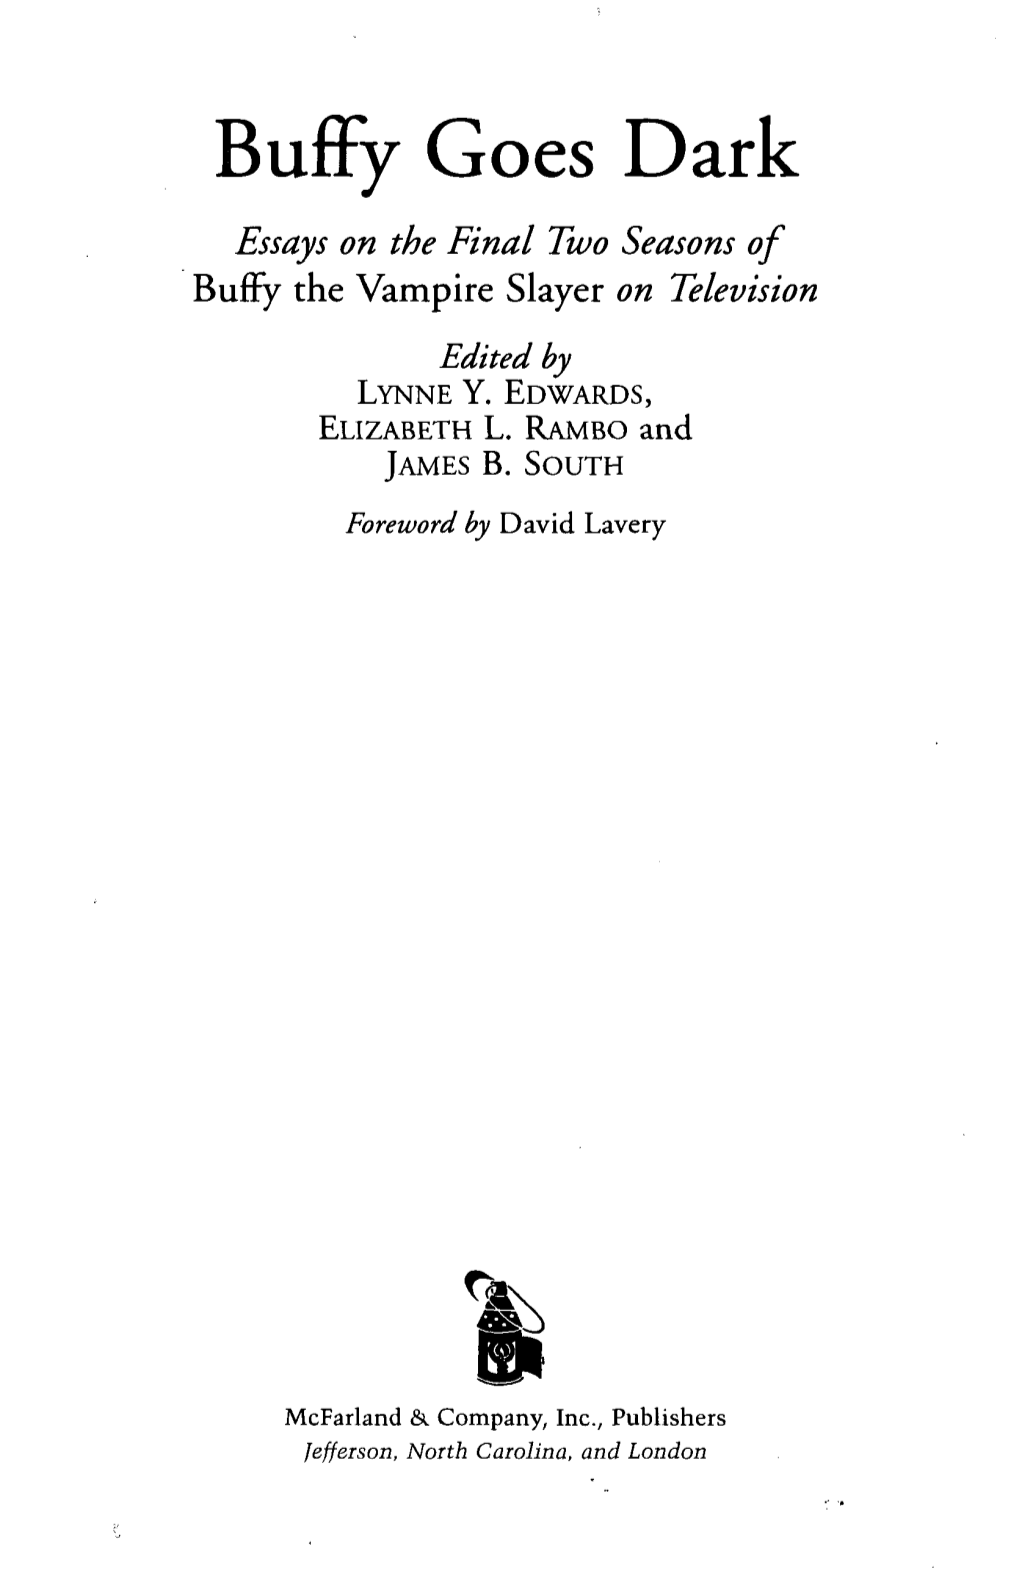 Buffy Goes Dark Essays on the Final Two Seasons of Buffy the Vampire Slayer on Television Edited by LYNNE Y